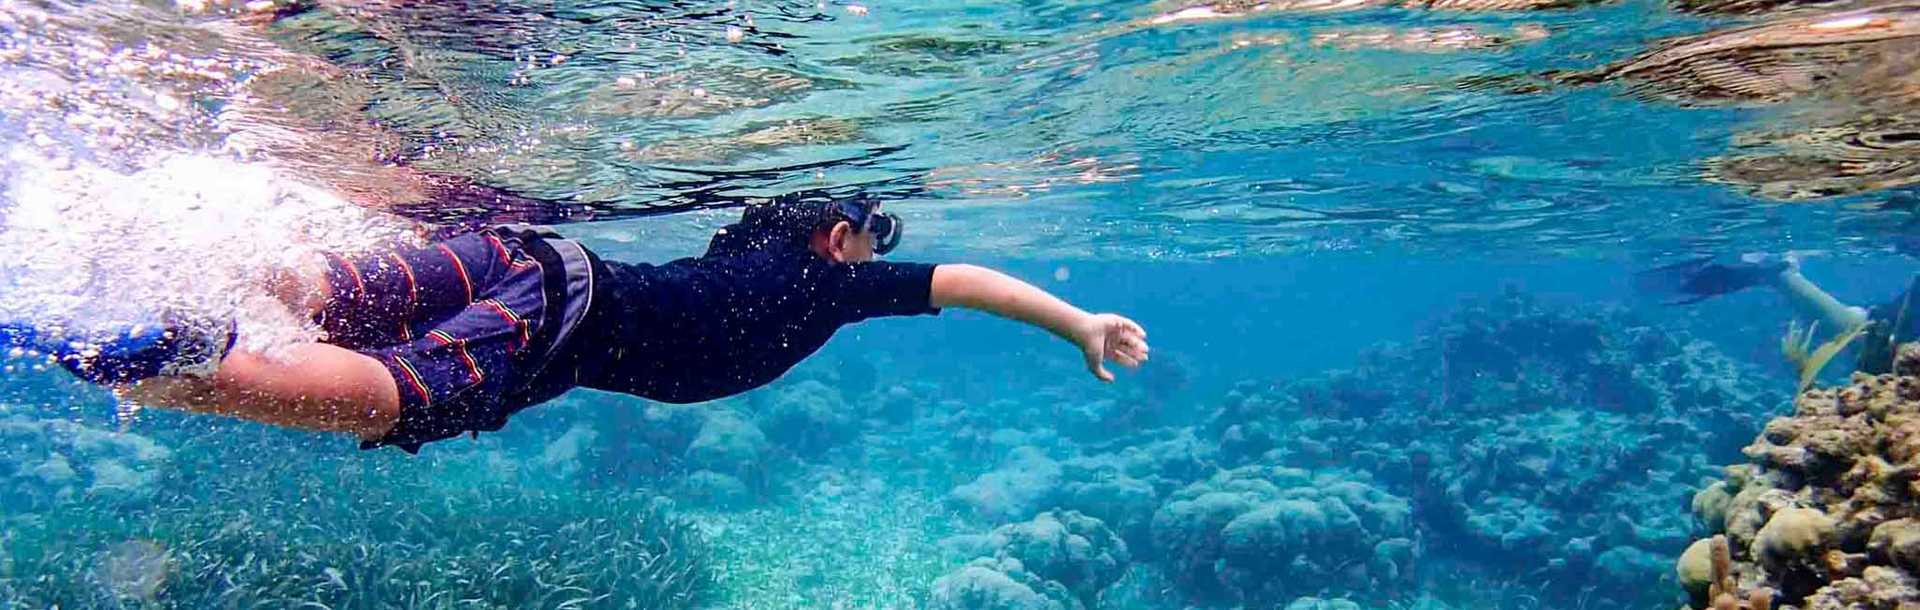 Young boy snorkeling in Ambergris Caye, Belize